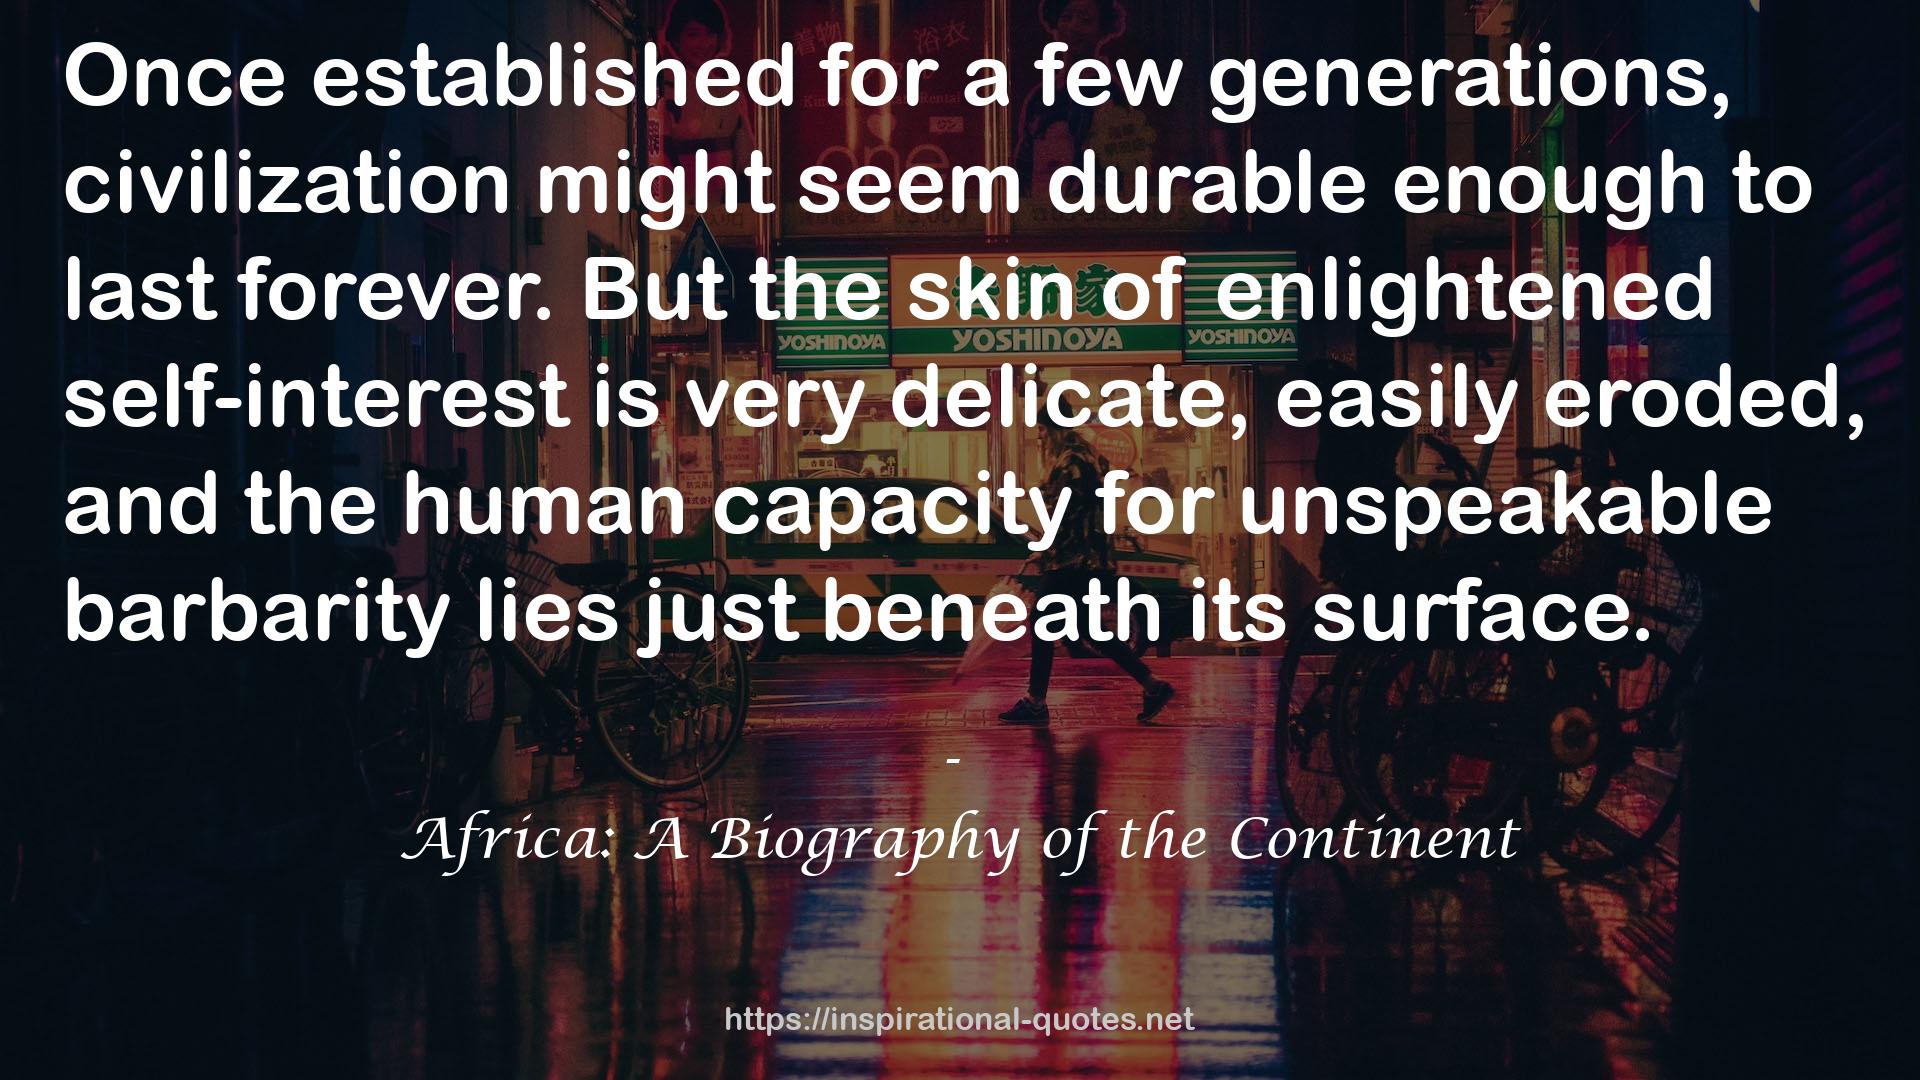 Africa: A Biography of the Continent QUOTES